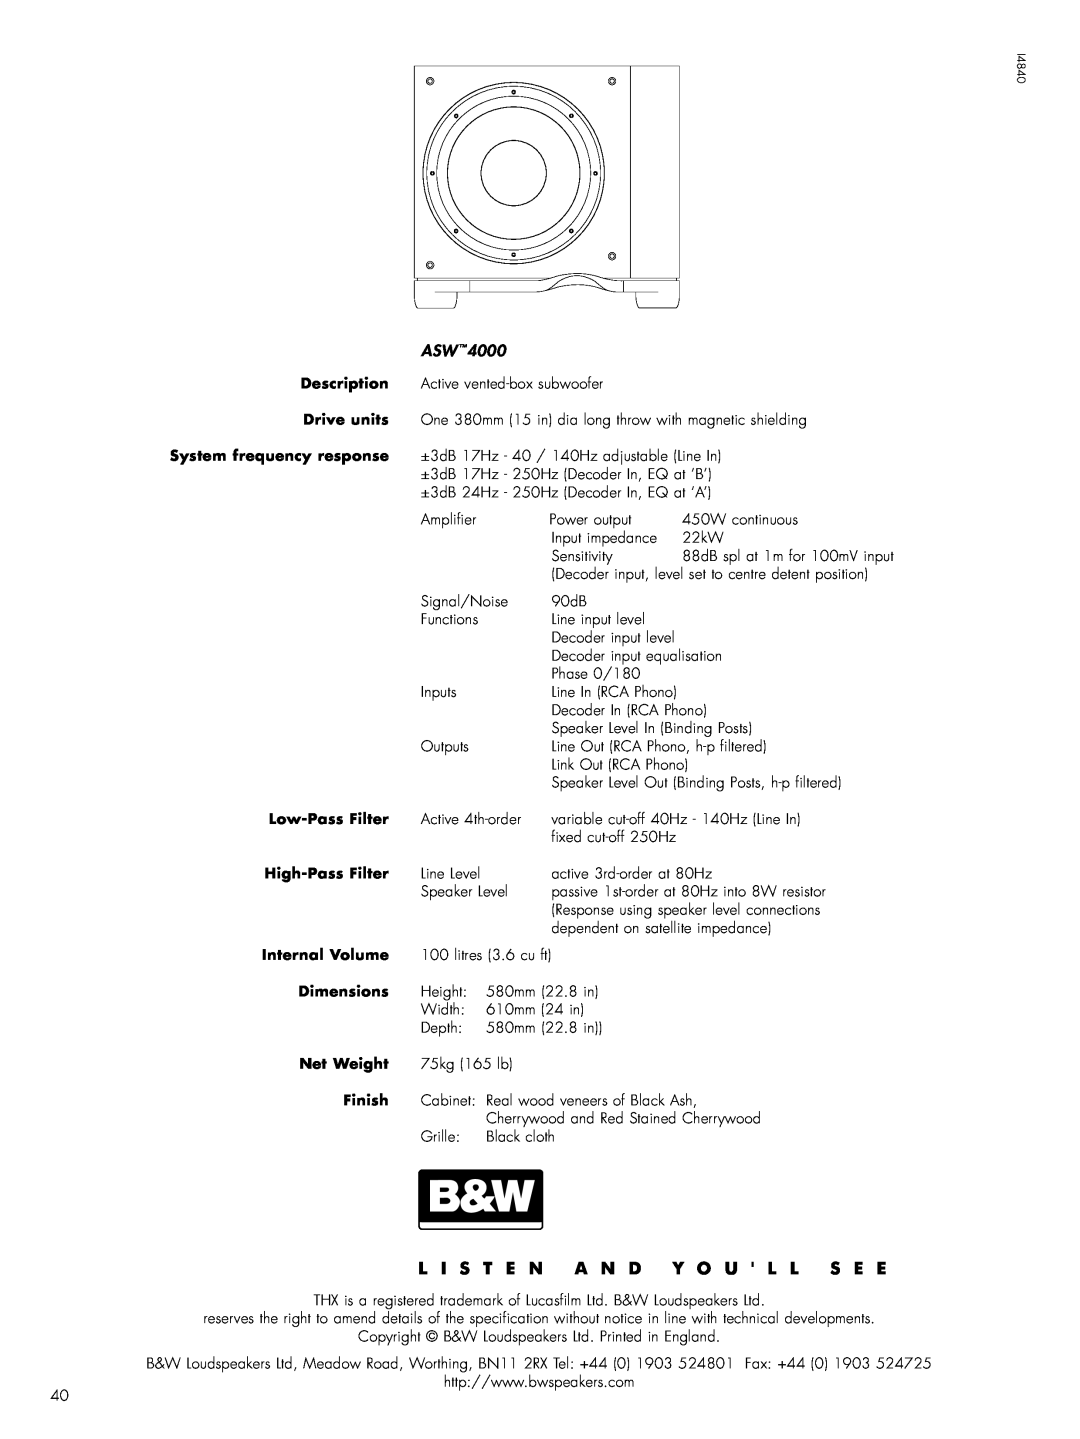 Bowers & Wilkins owner manual Low-PassFilter, High-PassFilter, Internal Volume, Dimensions, Net Weight, Finish, ASW4000 